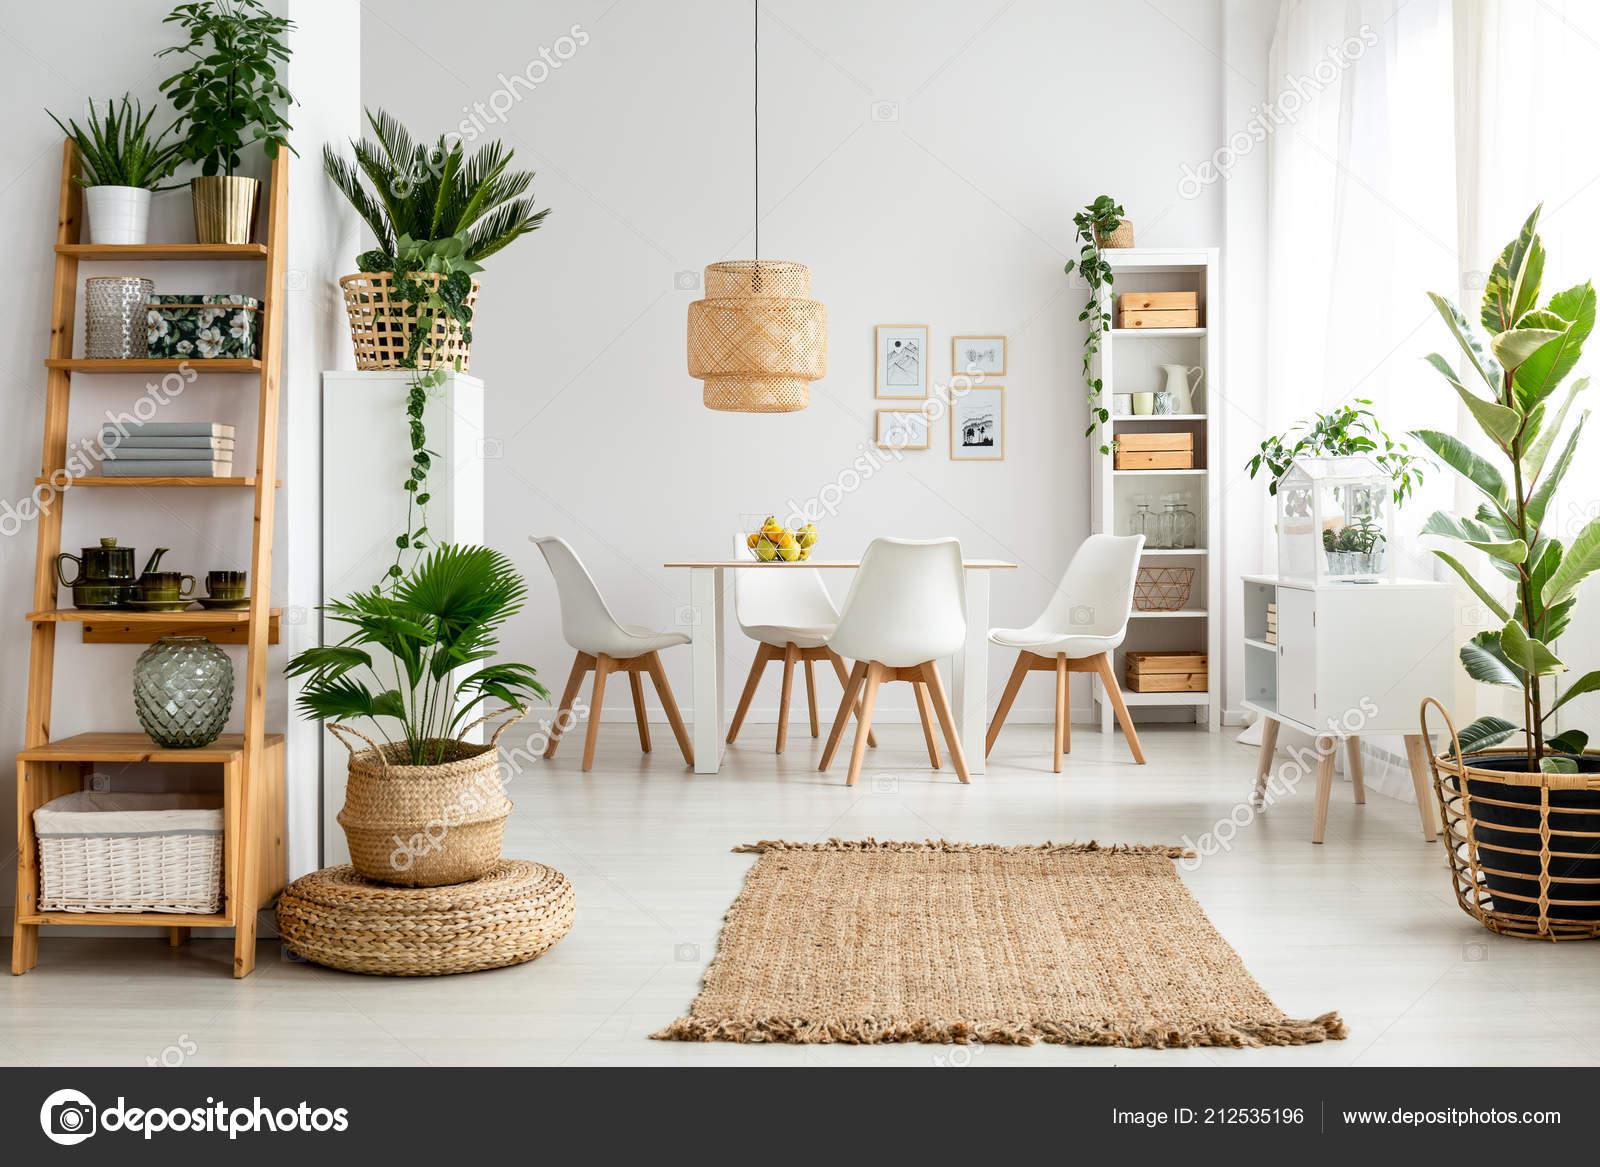 Pictures Rugs Under Kitchen Tables Plants Rug Natural Dining Room Interior White Chairs Table Lamp Stock Photo Photographeeeu 212535196